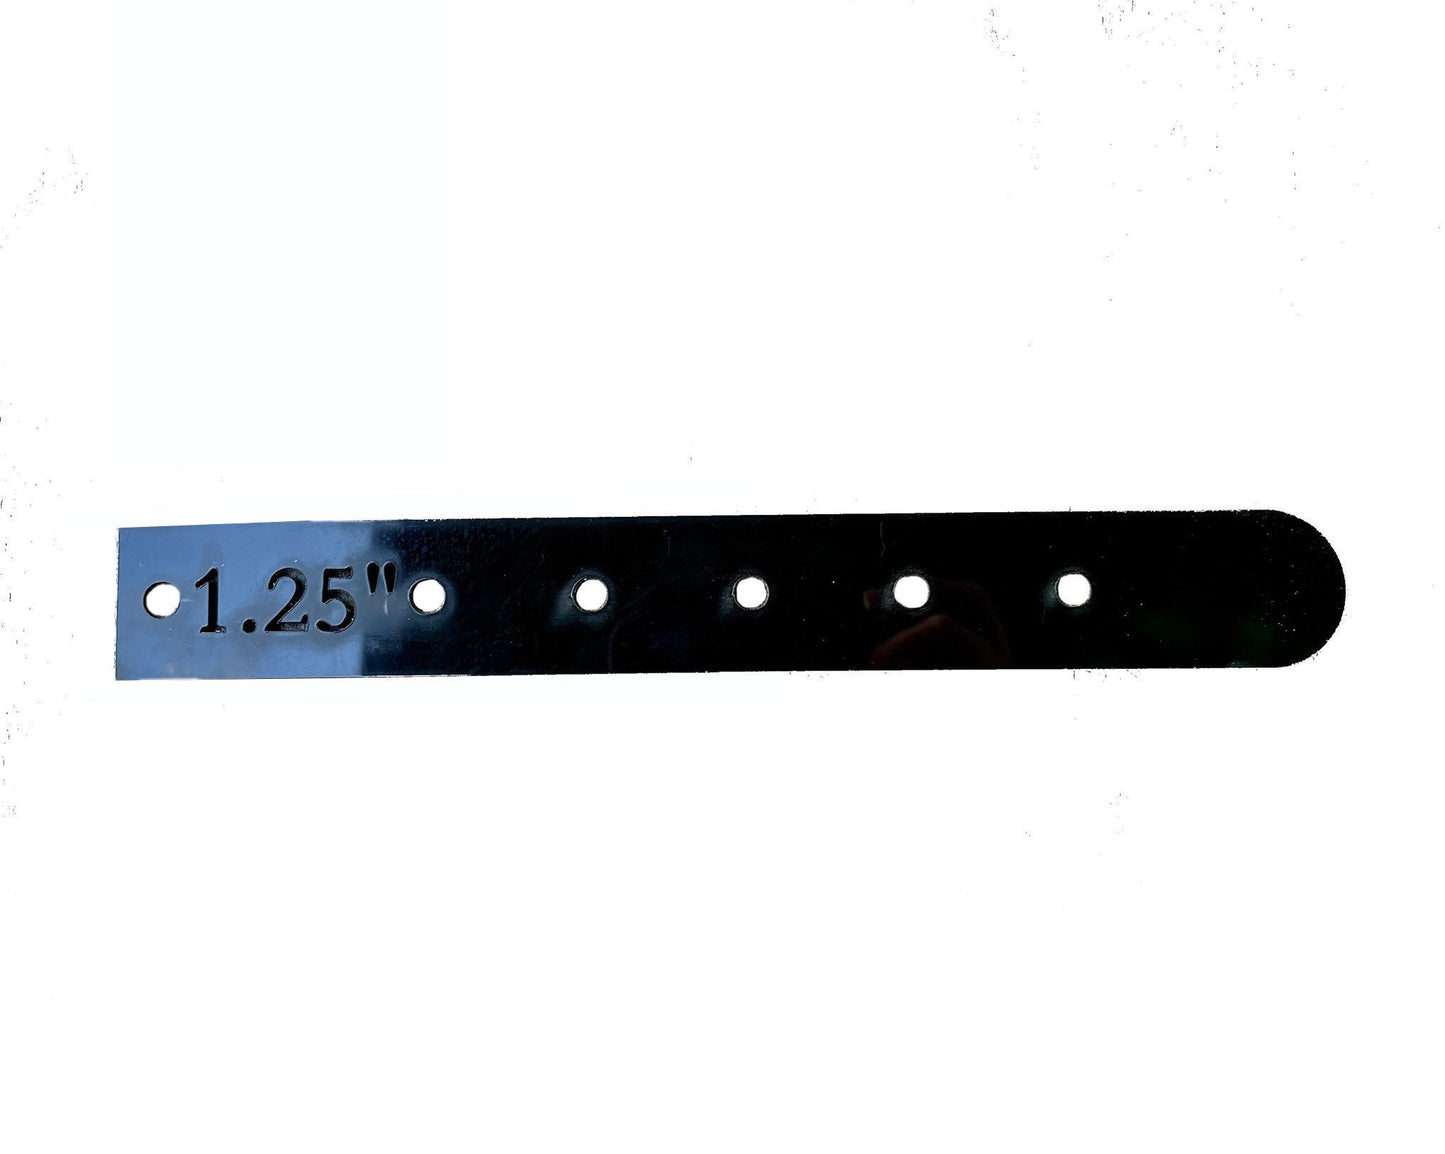 Acrylic Strap Templates - Multiple sizes - Collar template - Belt pattern - hole punch guide